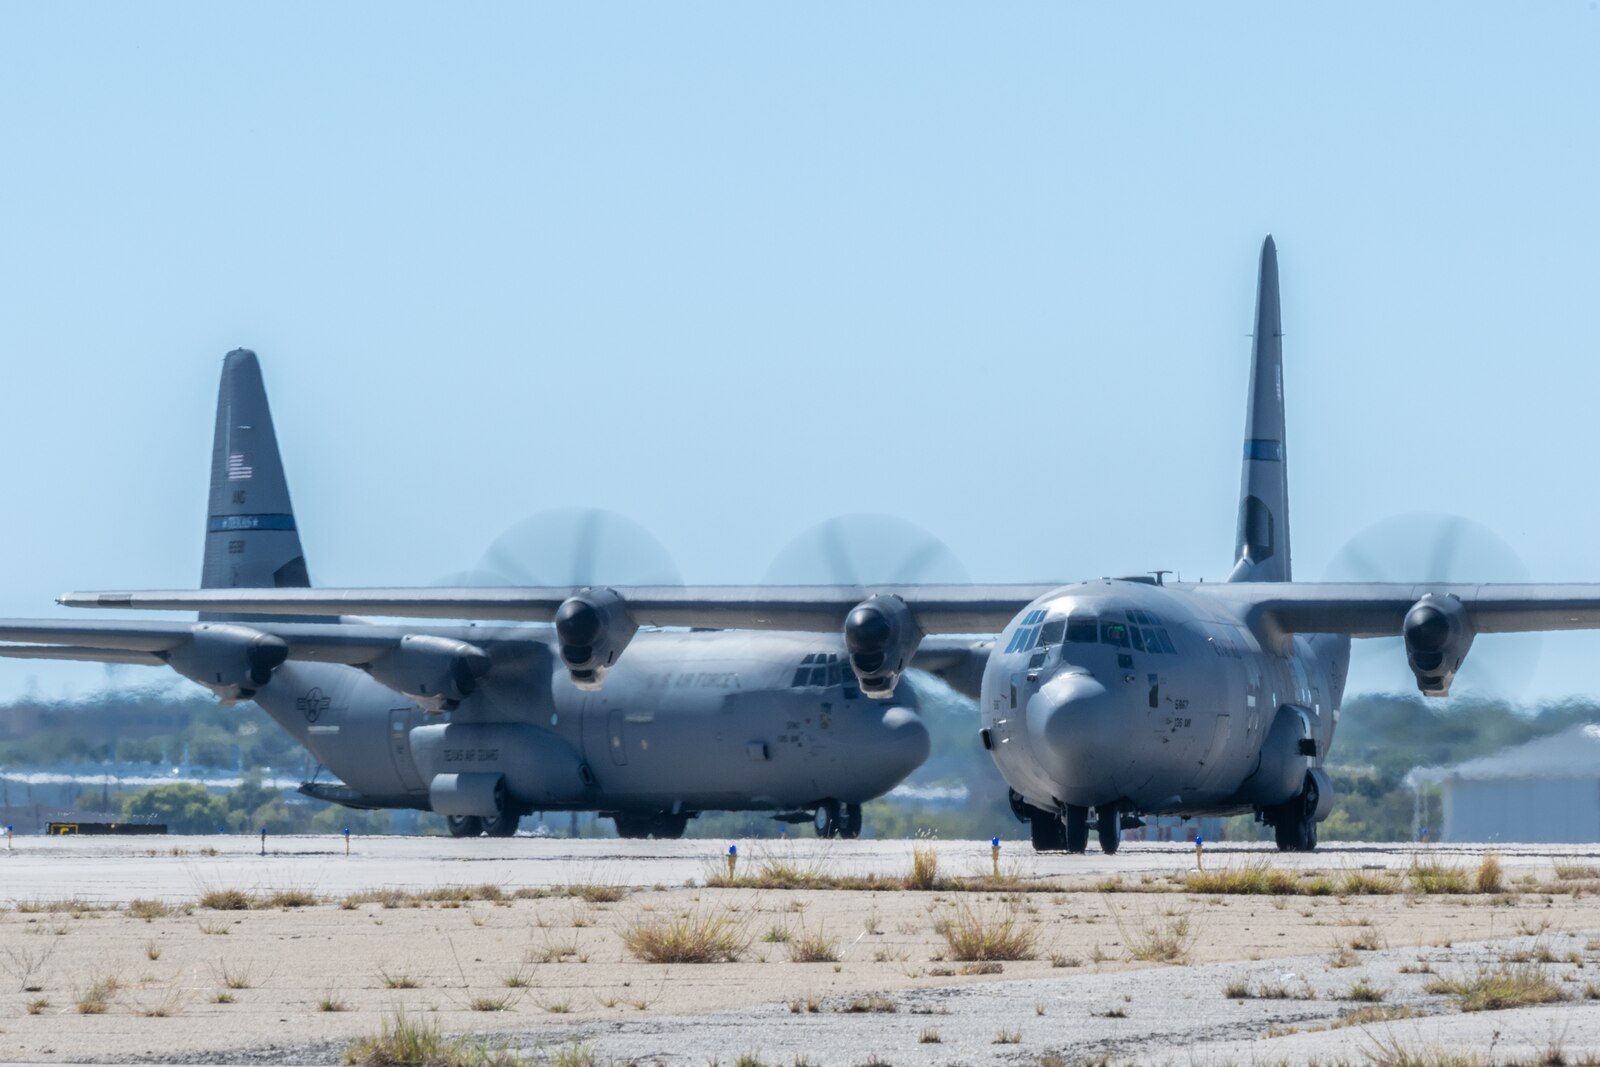 Two C-130Js taxi on runway.